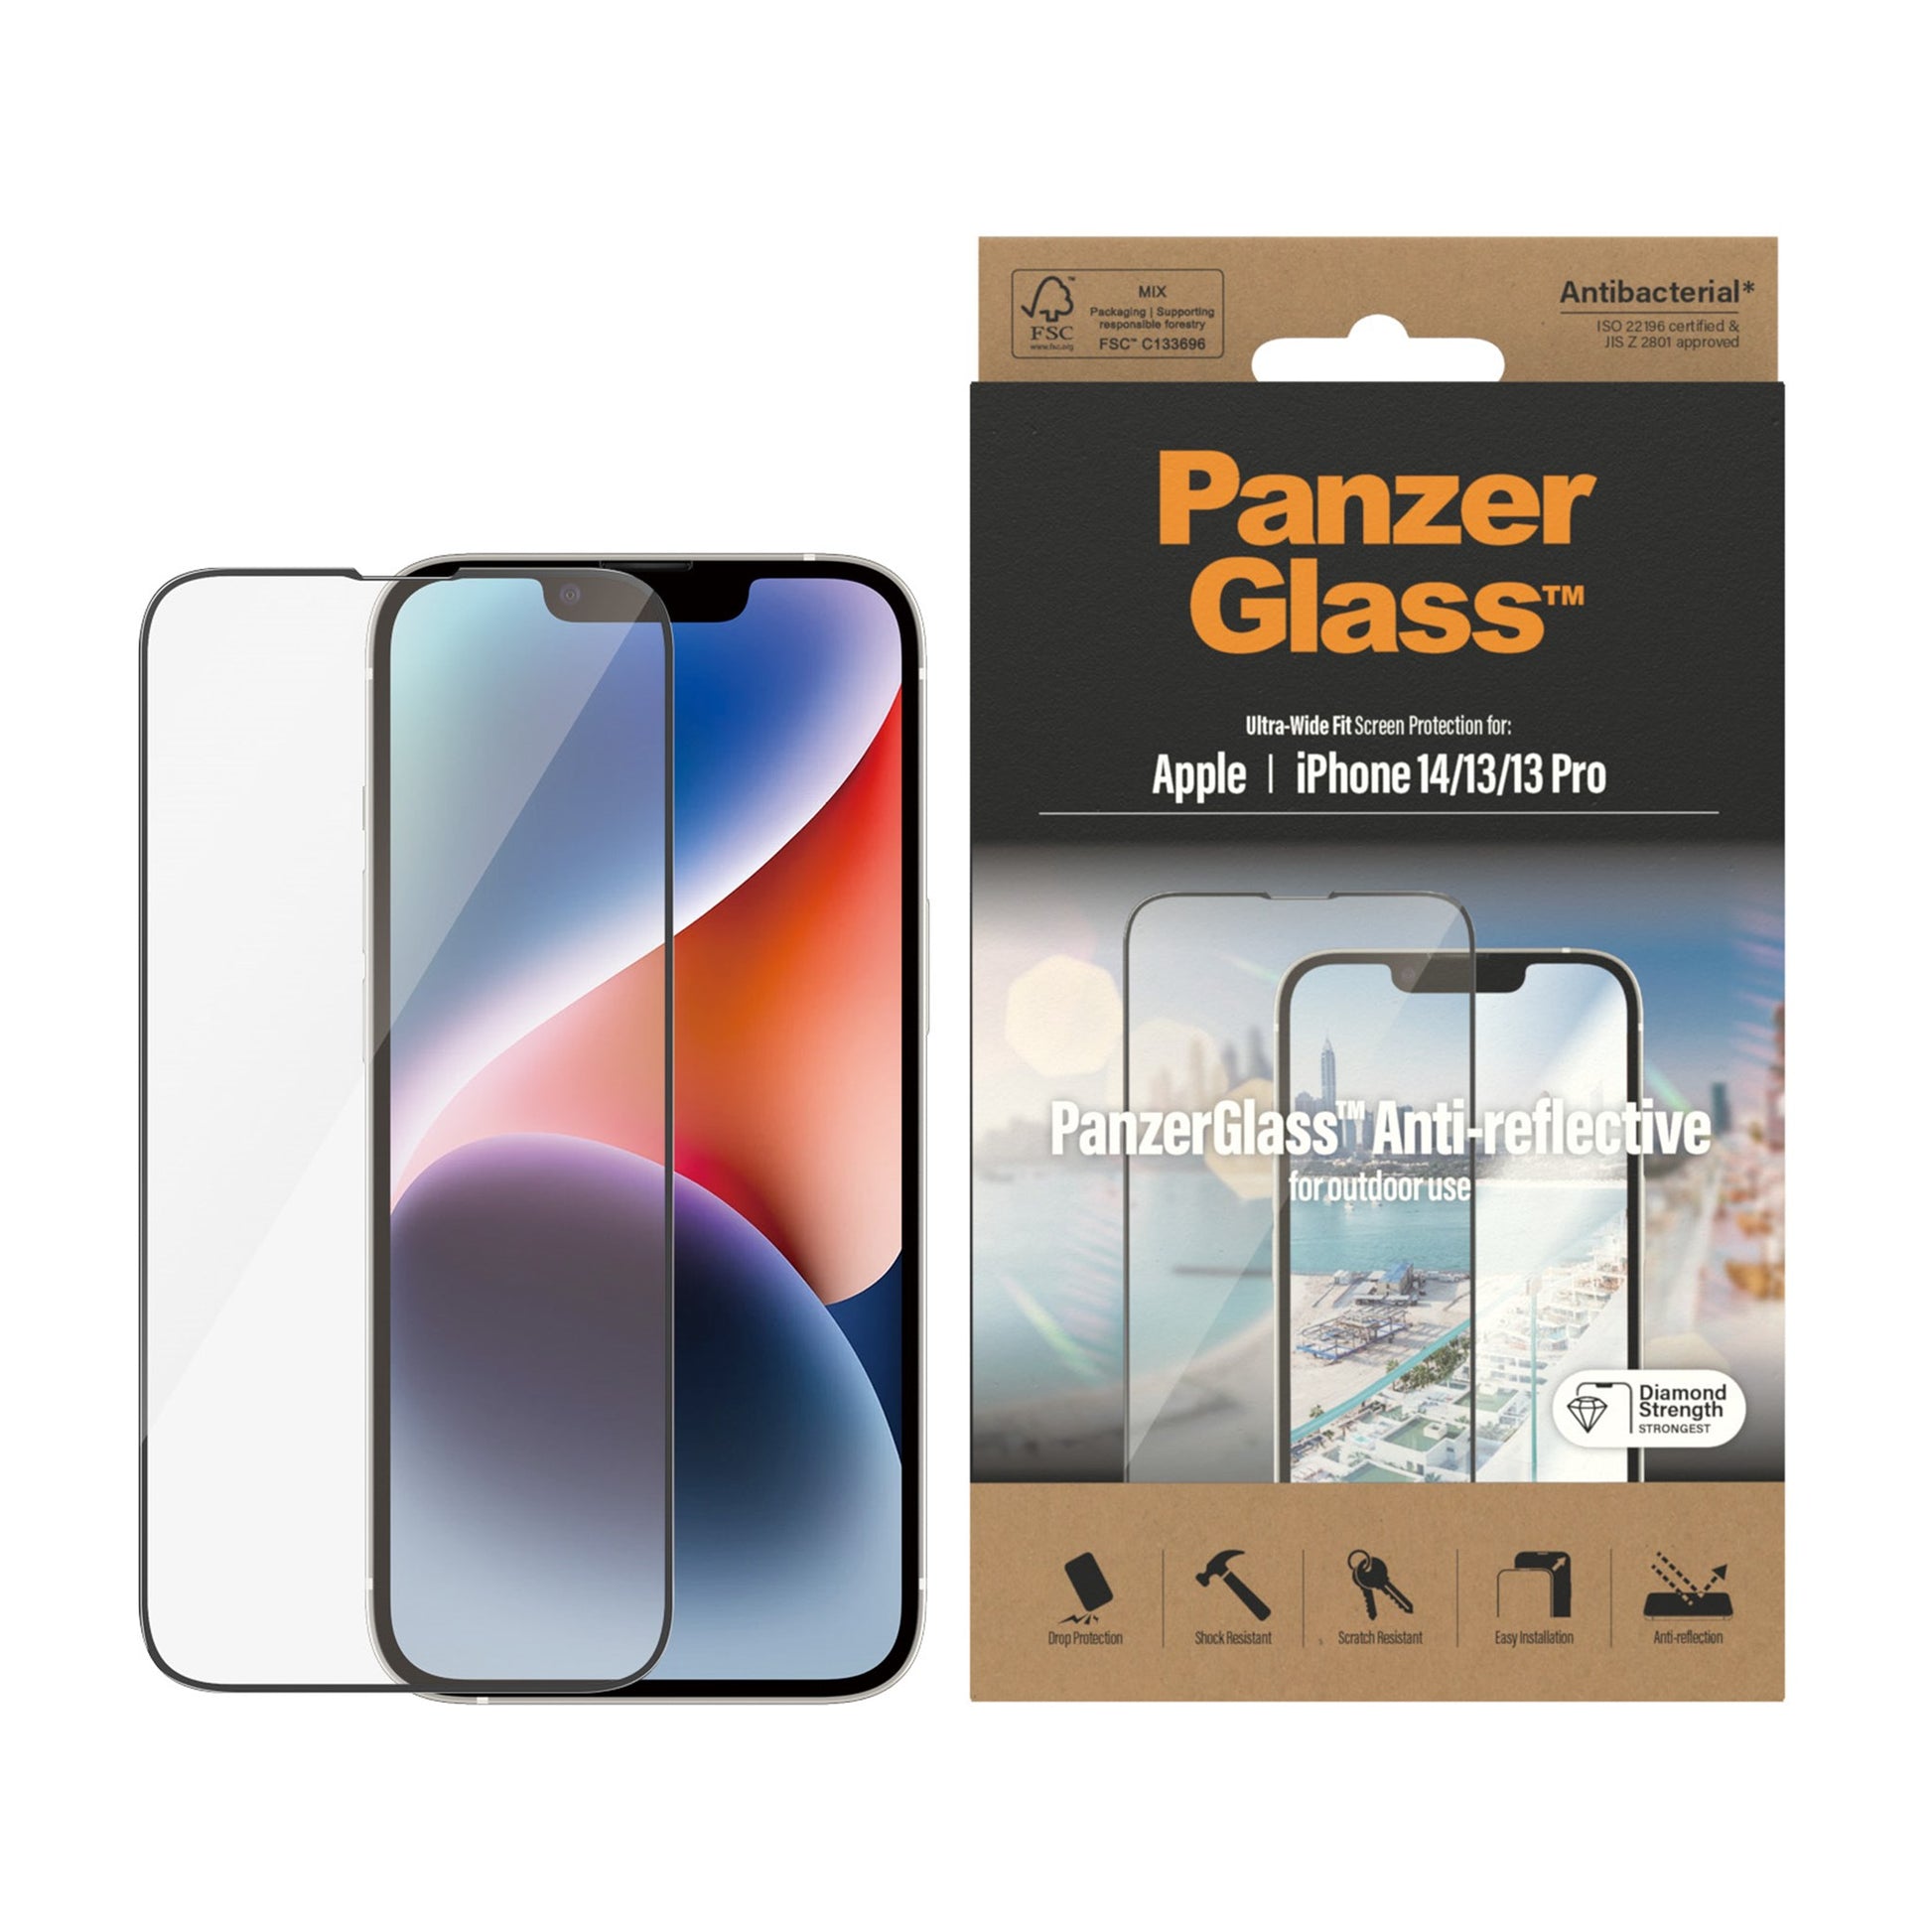 PanzerGlass™ Anti-reflective Screen Protector Apple iPhone 14 | 13 | 13 Pro | Ultra-Wide Fit 2